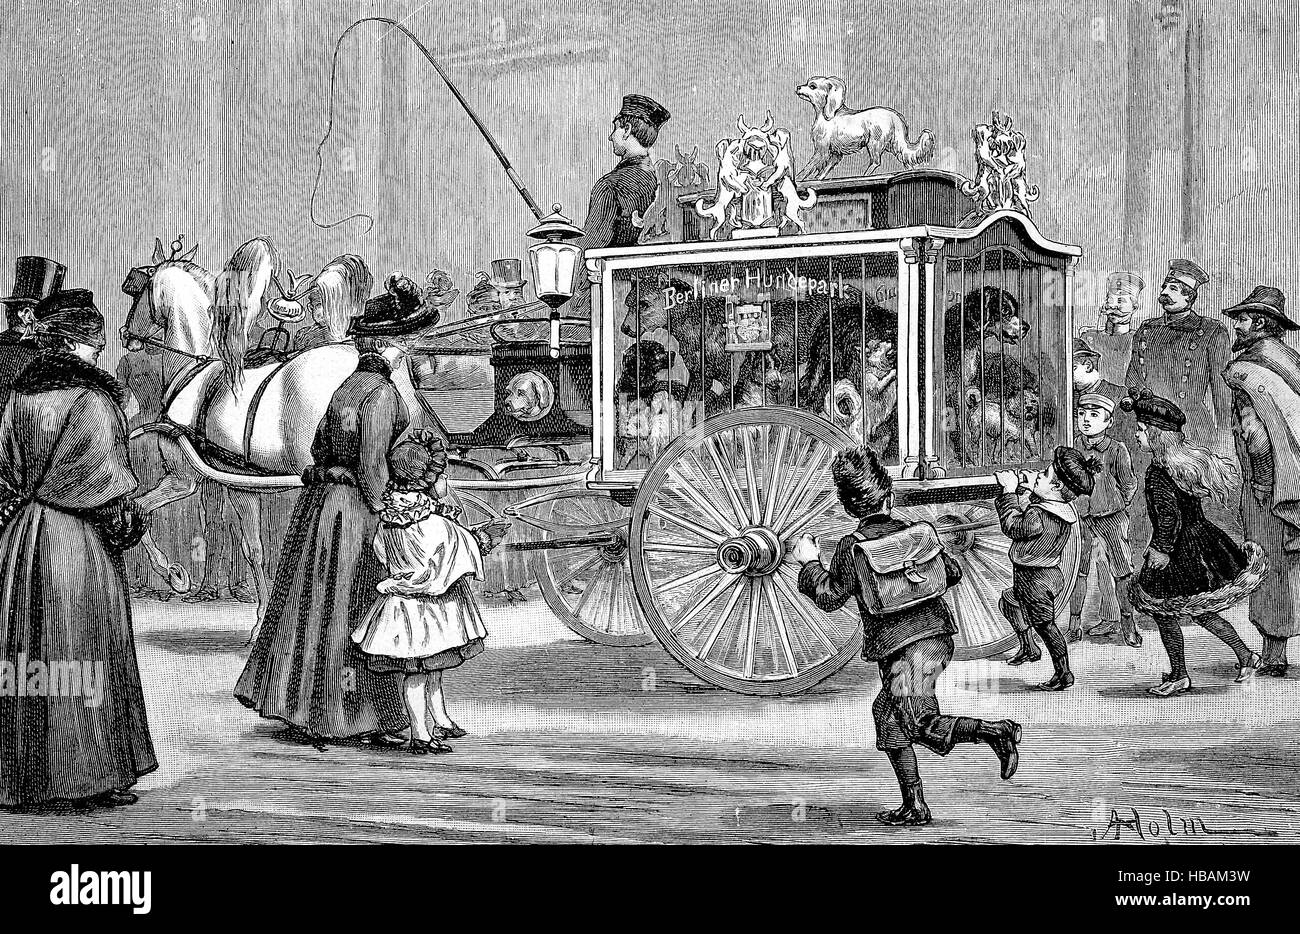 decorative advertising coach of the Berlin Dog Parks, Berliner Hundepark, Germany, hictorical illustration from 1880 Stock Photo